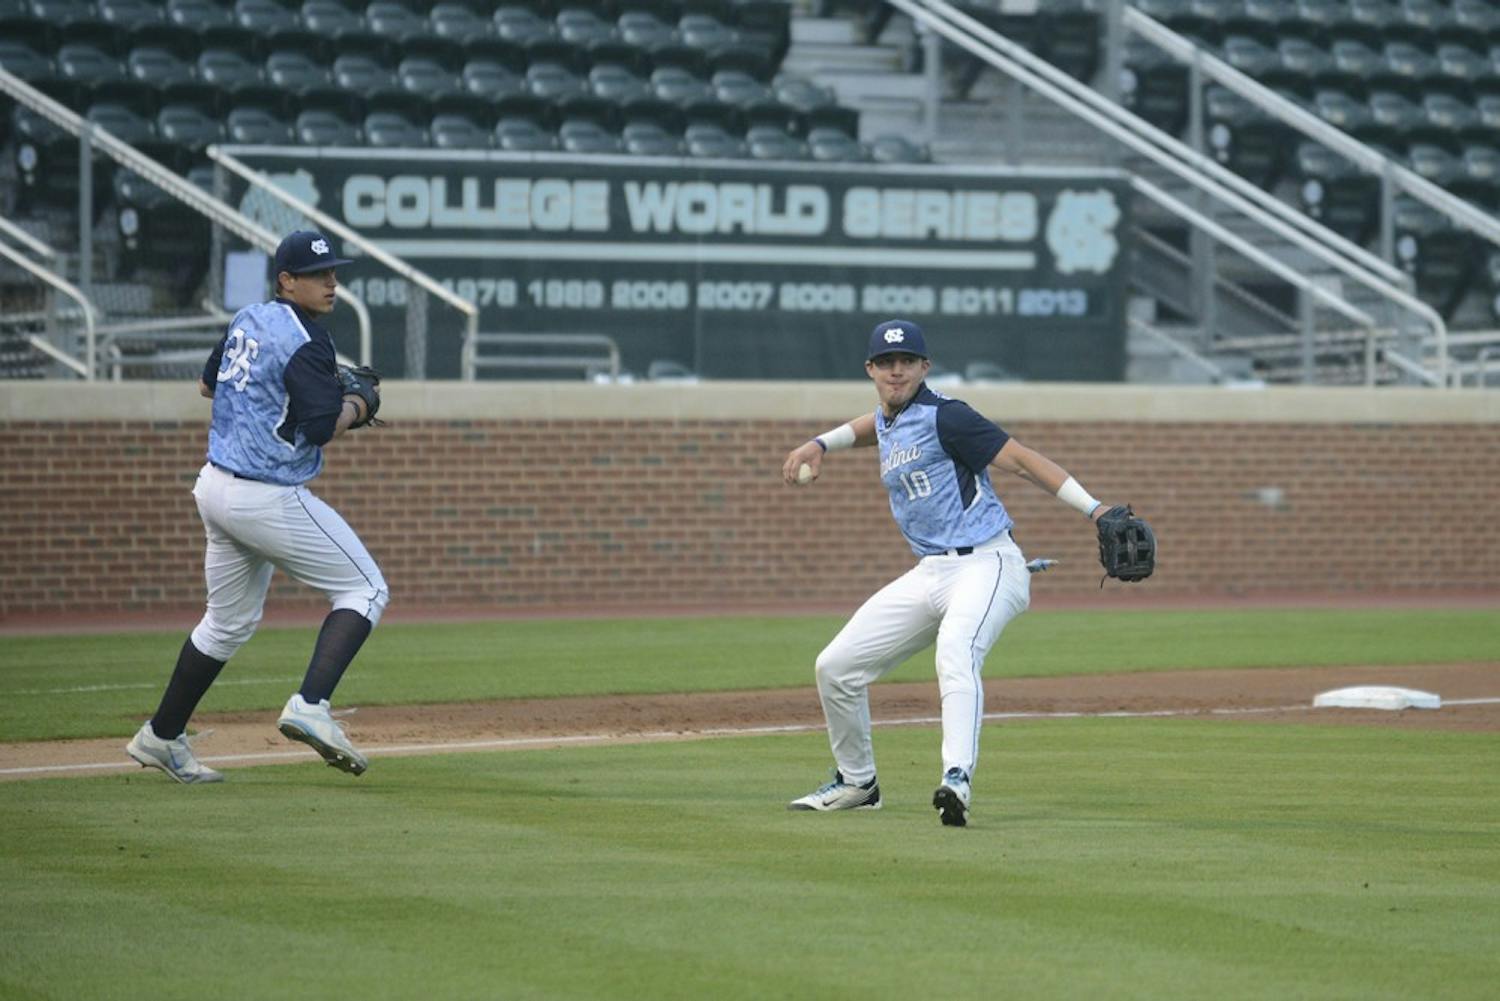 UNC freshman third baseman Zack Gahagan (10) has no throw on a lucky swinging bunt in Tuesday's game against High Point.